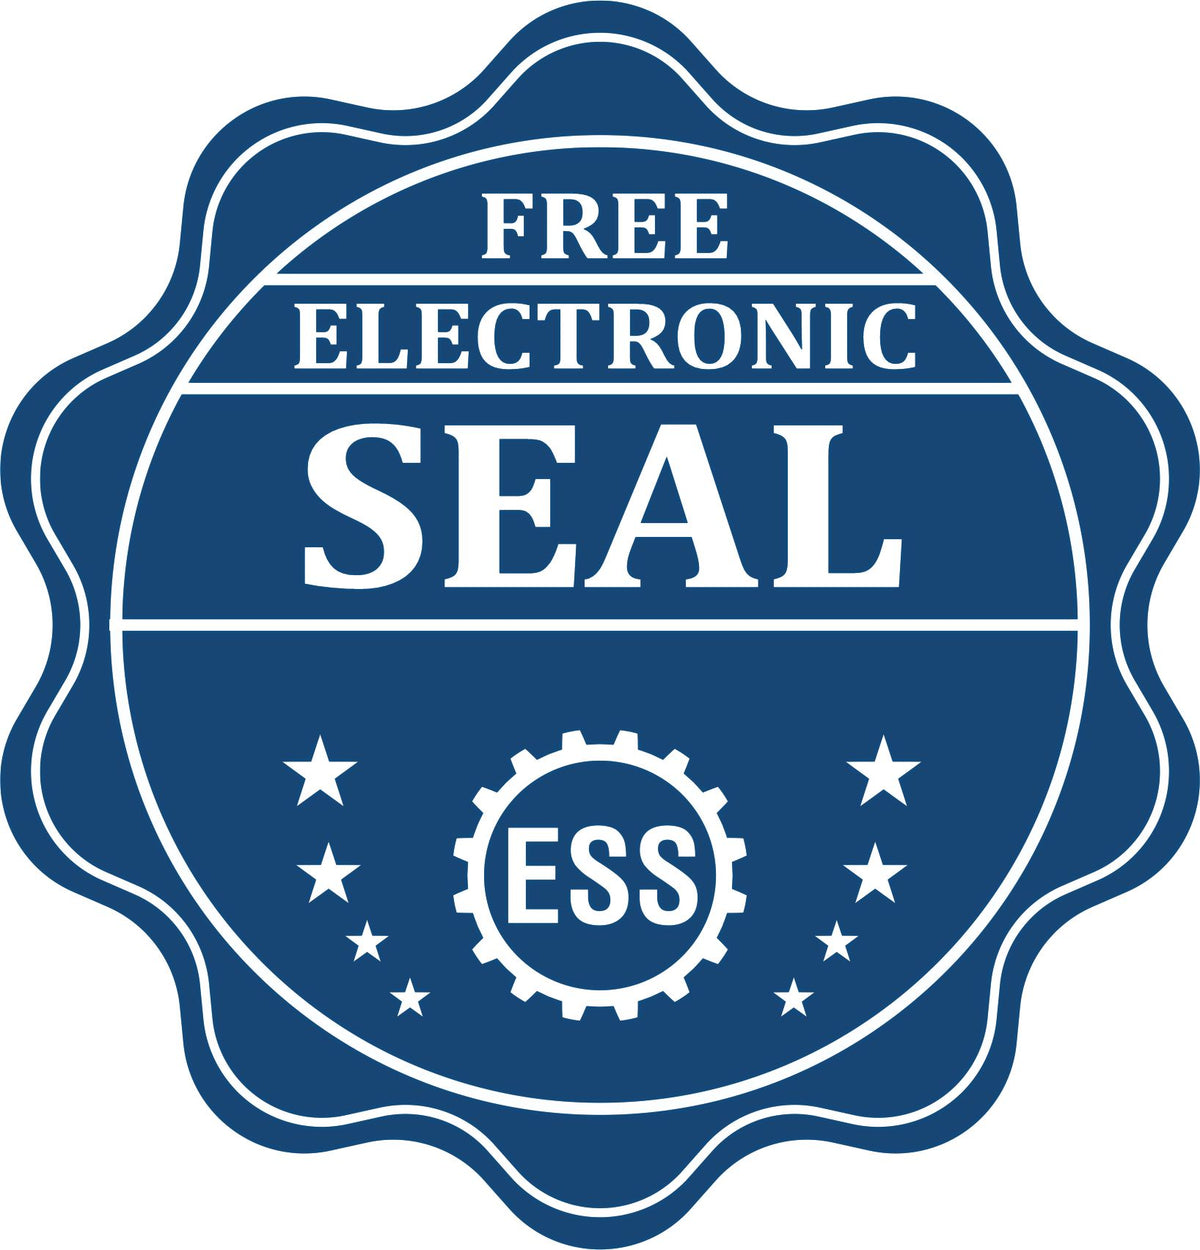 A badge showing a free electronic seal for the State of North Dakota Long Reach Architectural Embossing Seal with stars and the ESS gear on the emblem.